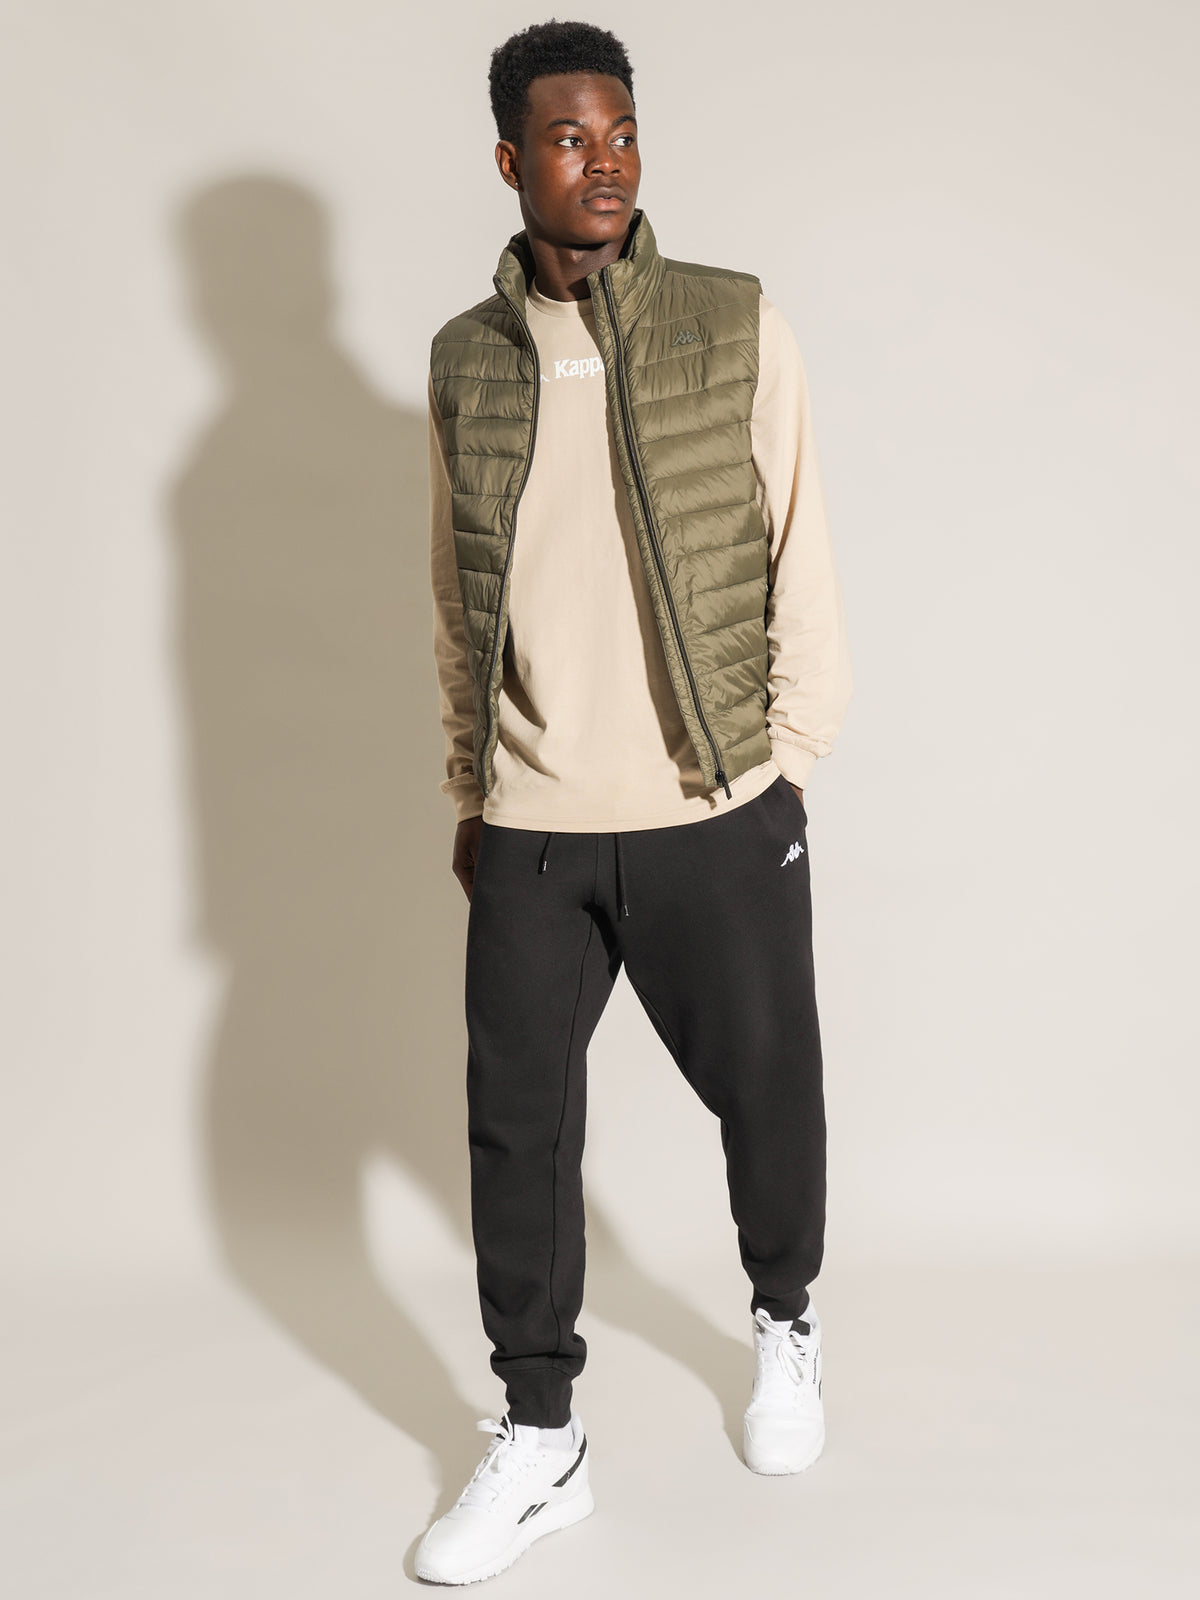 Orion Puffer Vest in Military